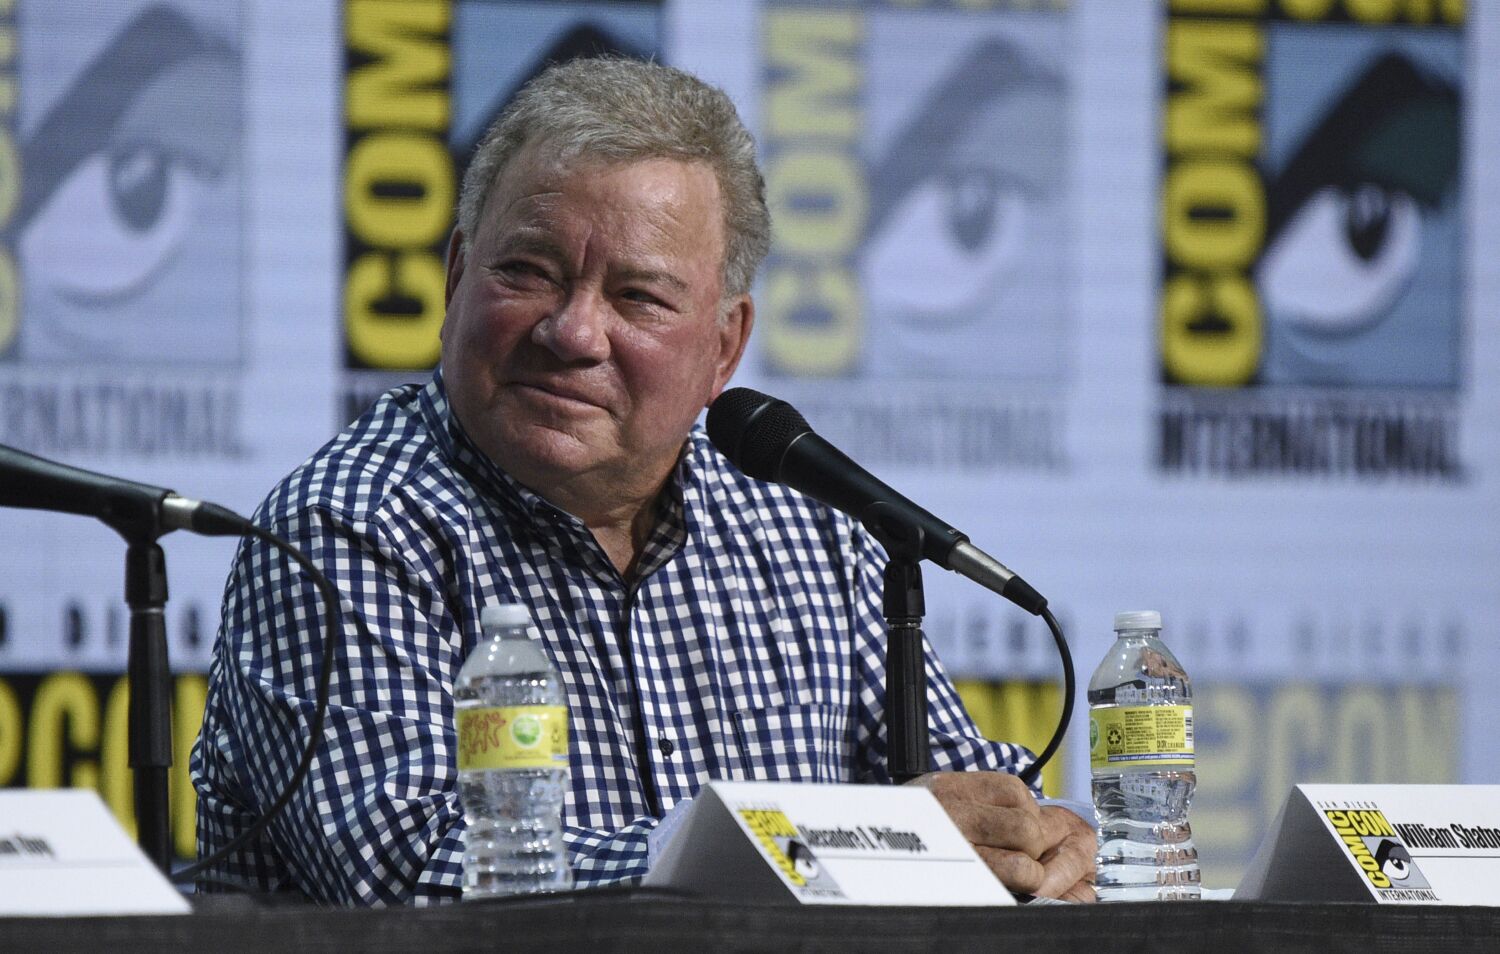 William Shatner finds a good reason for his new bio-doc: 'I don't have long to live'